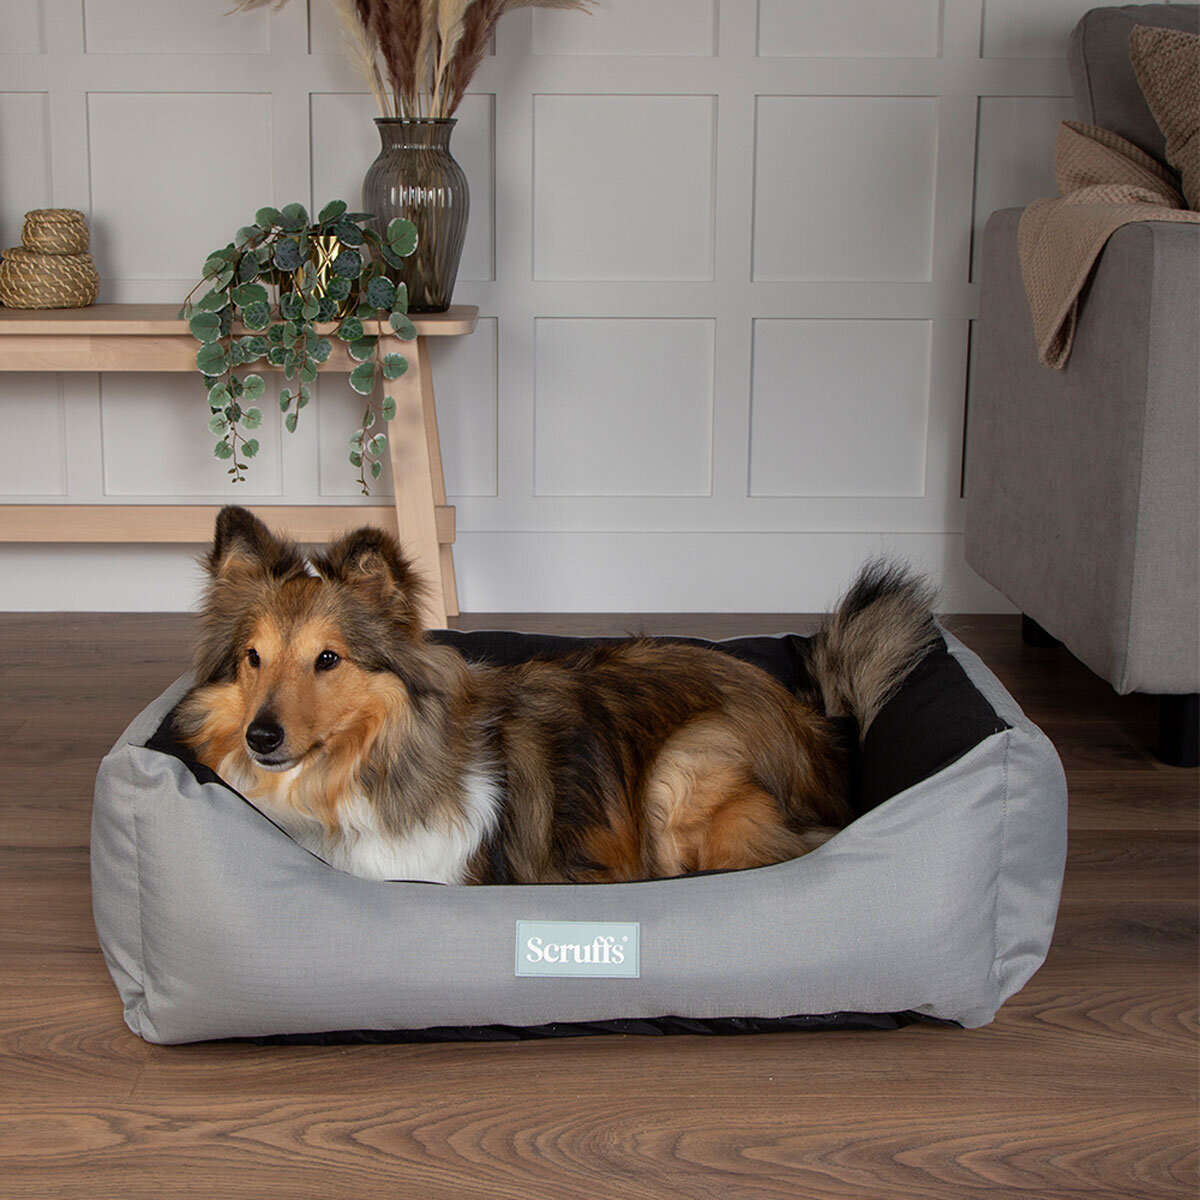 Scruffs Expedition Box Pet Bed, 24" x 19.5" (60cm x 50cm) in Grey